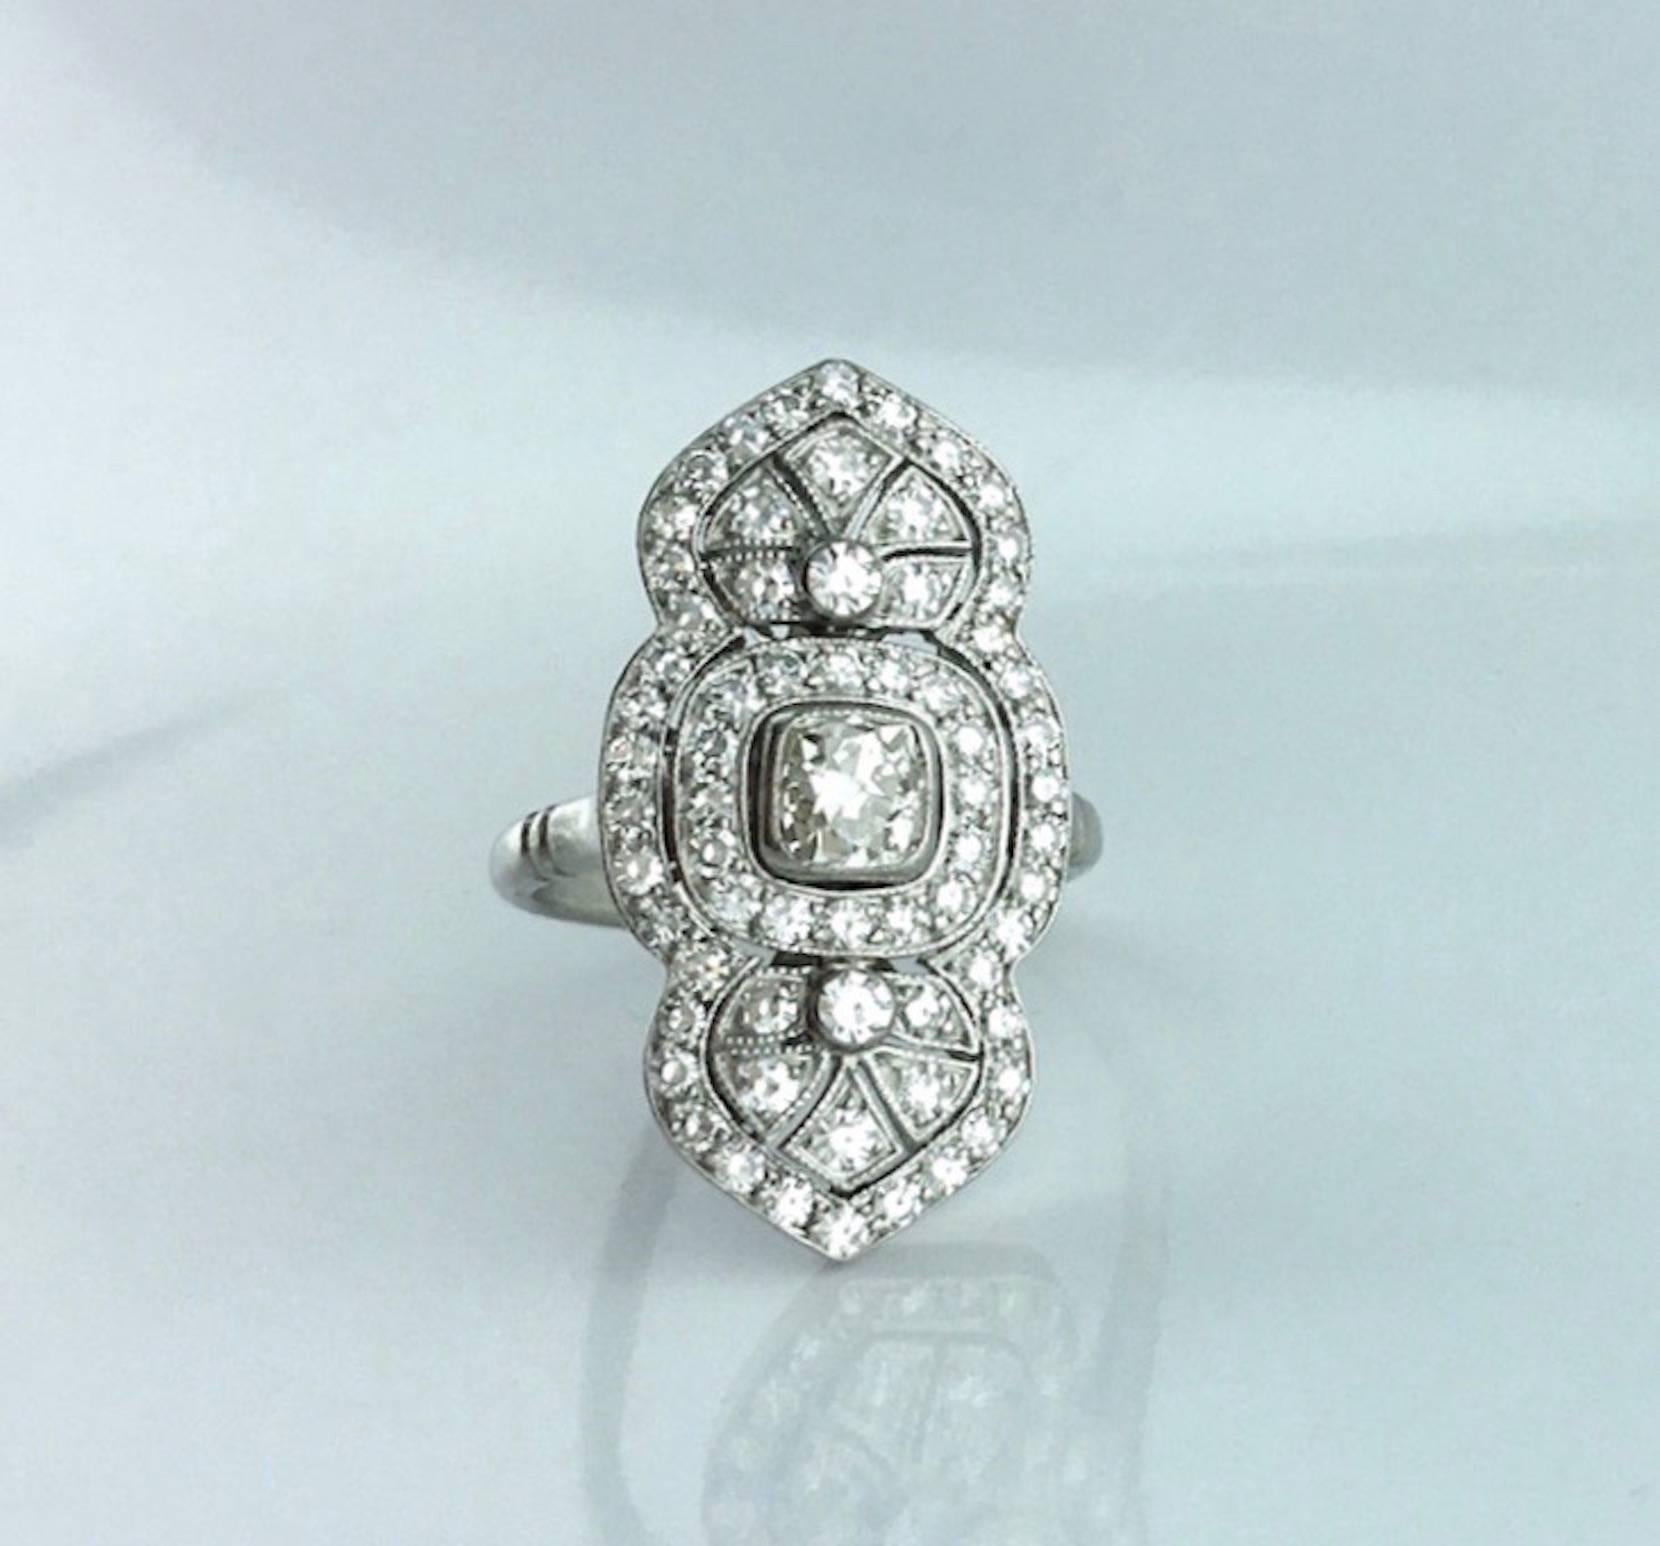 Awesome Art Deco design with Indian inspiration, this Platinum and Diamond (total approximately 1.60 carats) Ring is Stunning.
French marks.
Contemporary.

Gross weight: 7.9 grams.